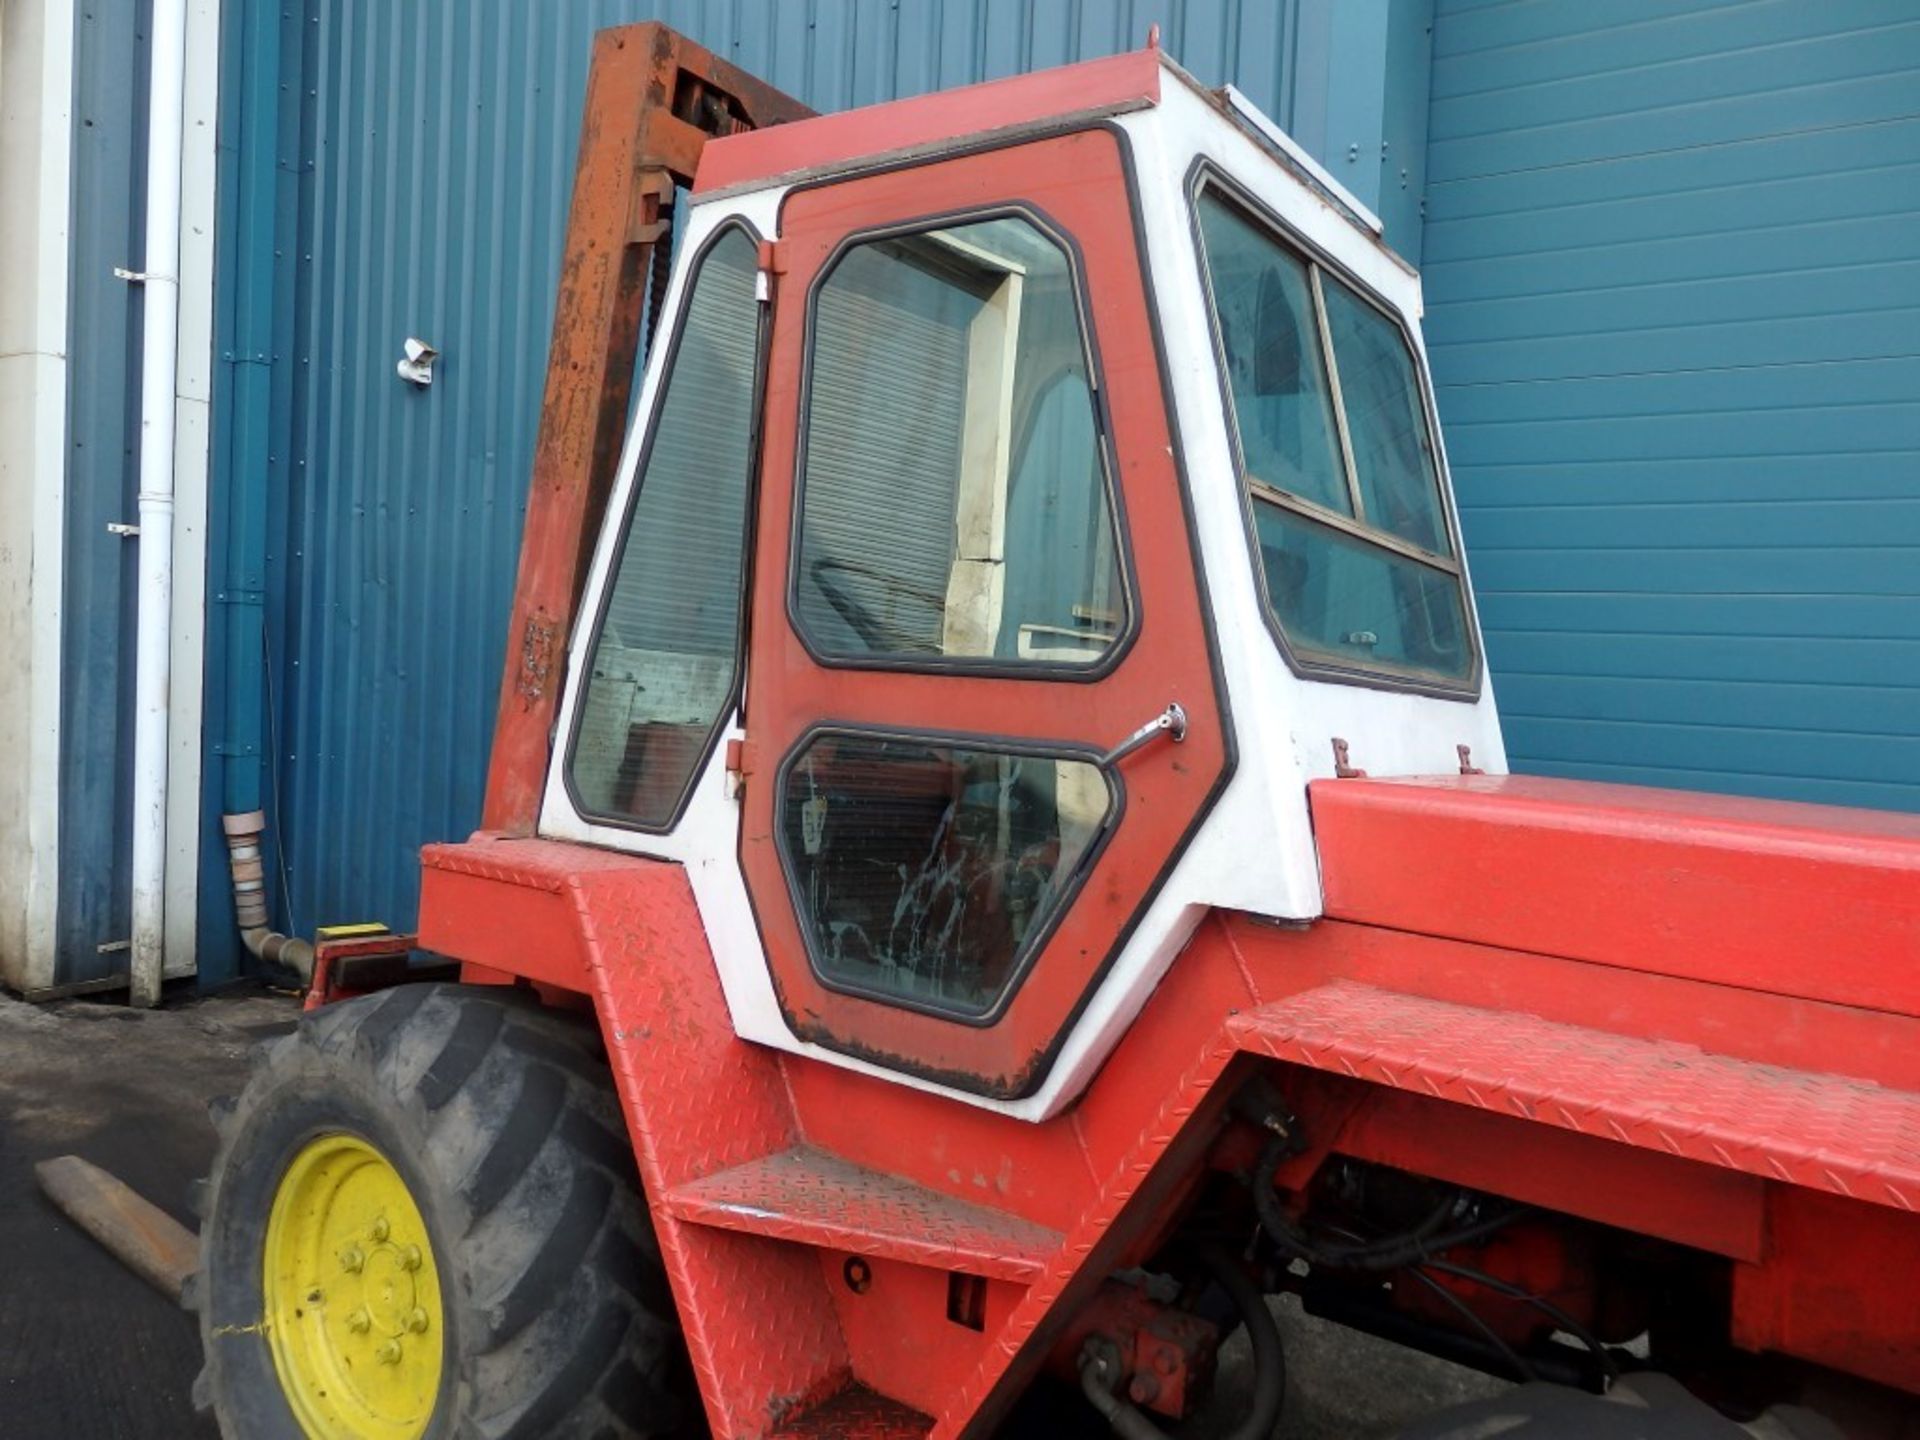 1 x Manitou Heavy Duty Rough Terrain Diesel Forklift Truck - 4444hrs - Exhaust Requires - Image 13 of 30